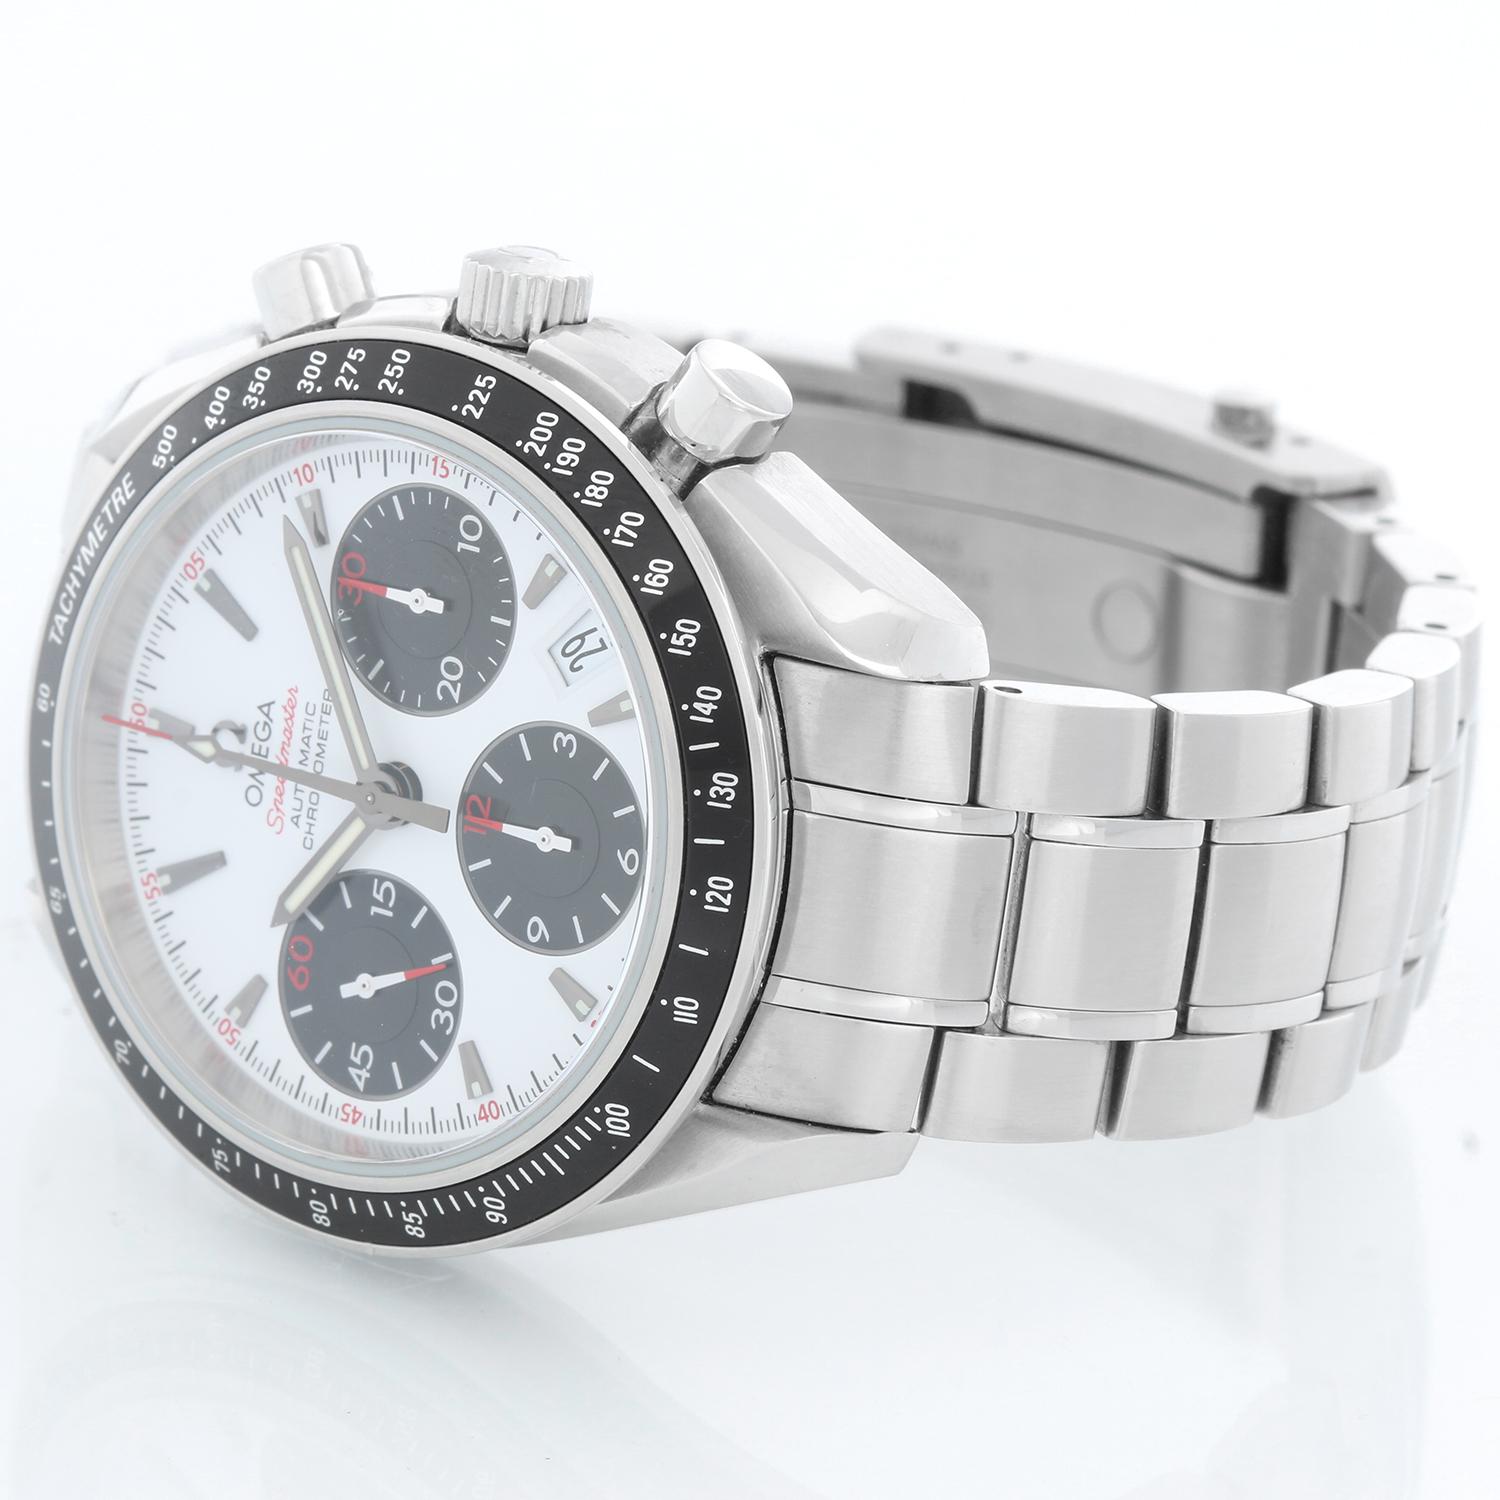 Omega Speedmaster Self-winding Chronograph 40mm Watch  - Automatic winding. Stainless steel case (40mm diameter). White Panda Dial with black and red markers. stainless steel Omega bracelet. Pre-owned with box and cards. 